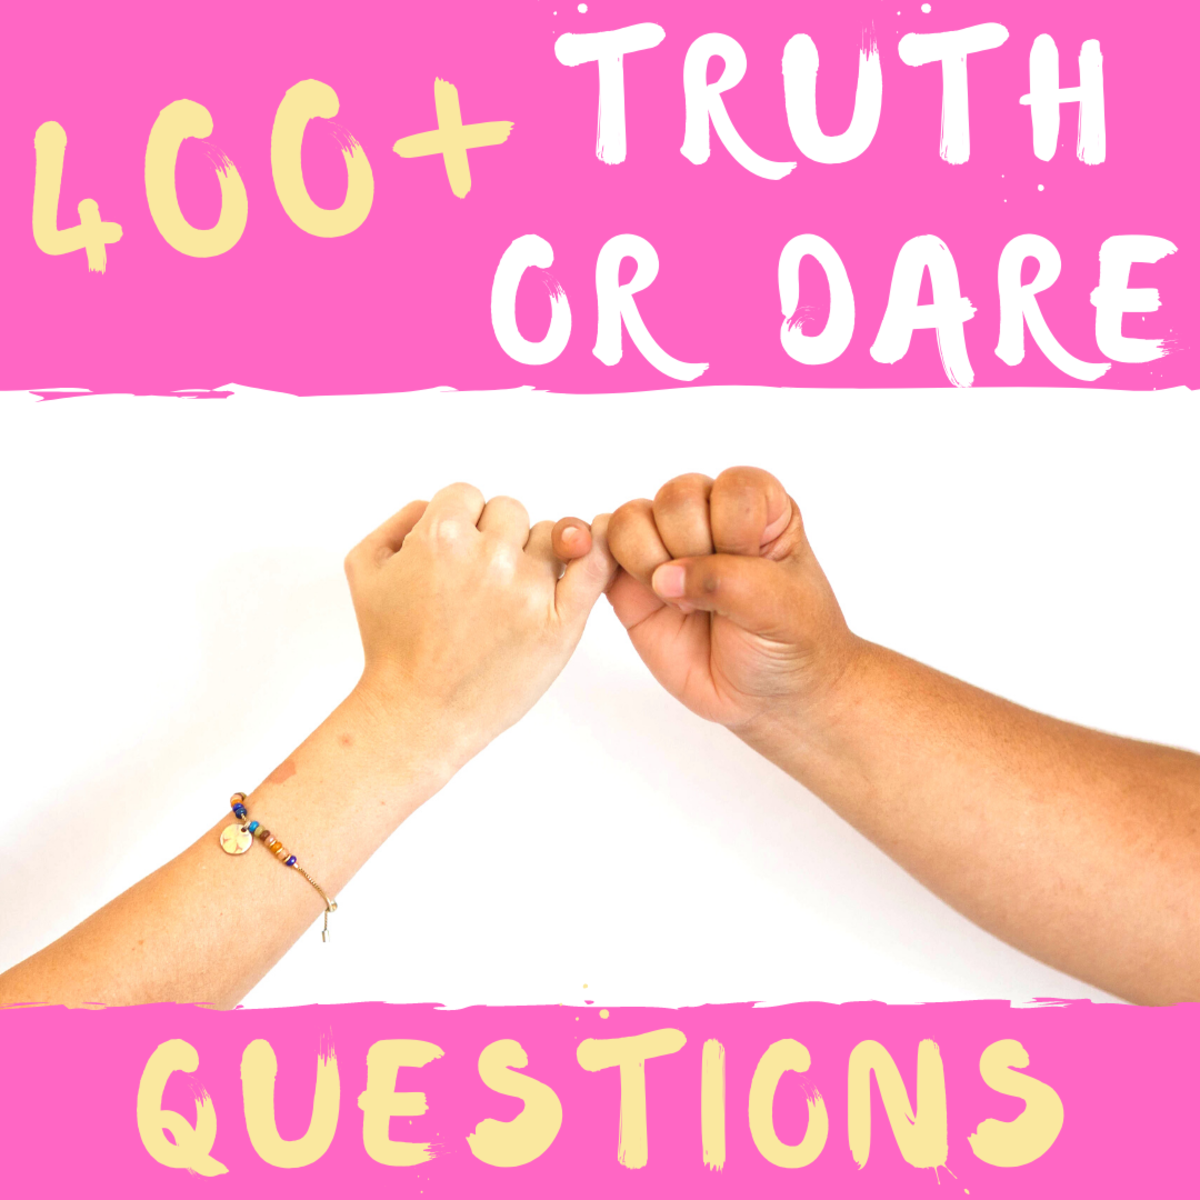 400+ Embarrassing Truth or Dare Questions to Ask Your Friends